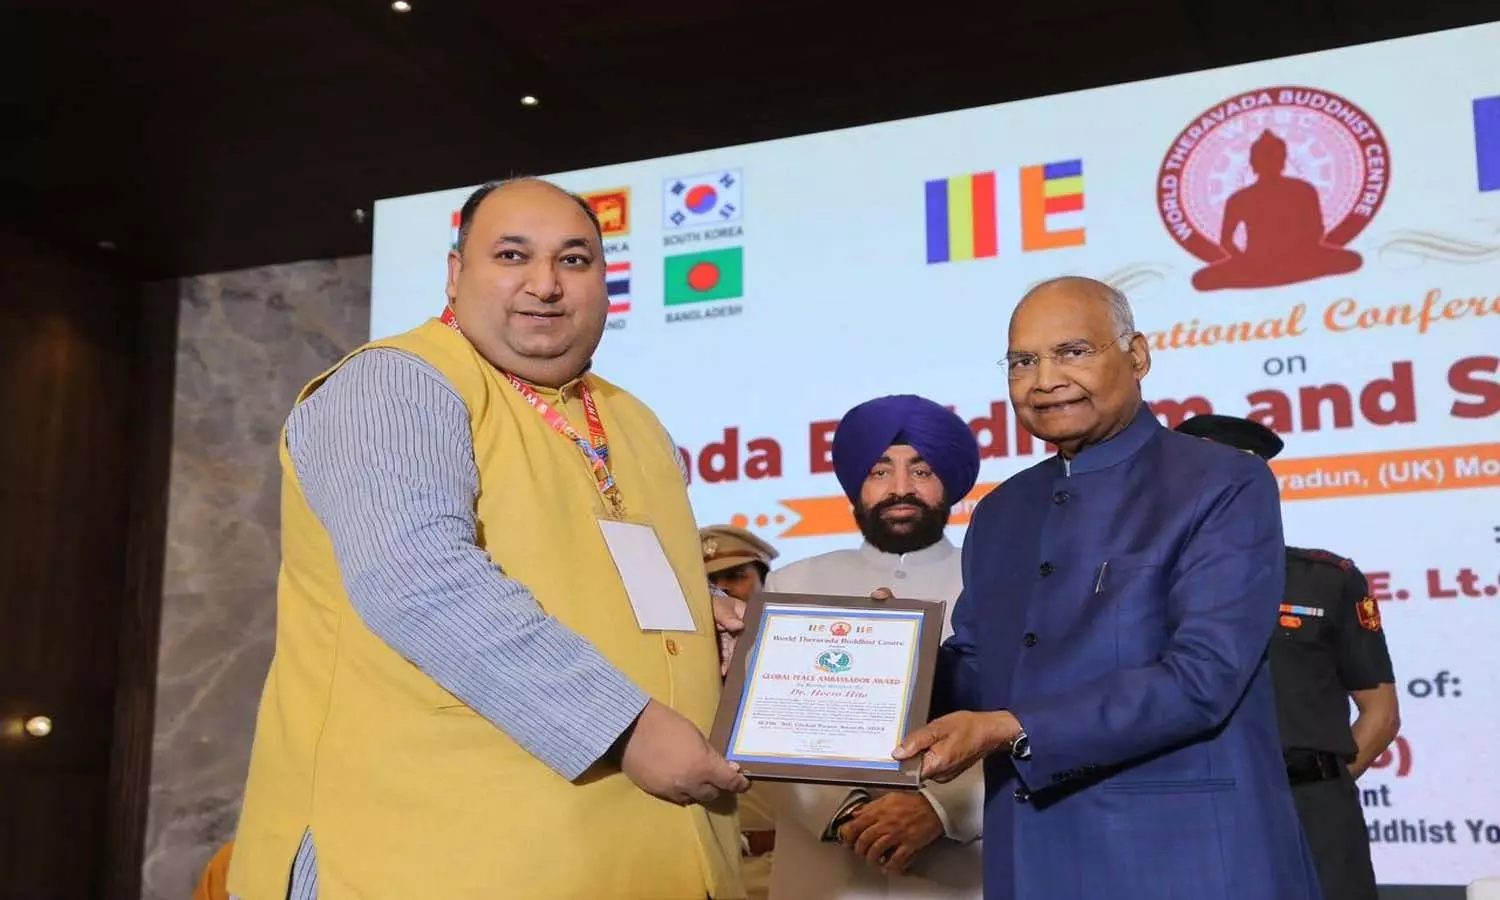 Former Excellency President Ramnath Kovind honored Dr. Hiro Hito with the Global Buddhist Ambassador Award